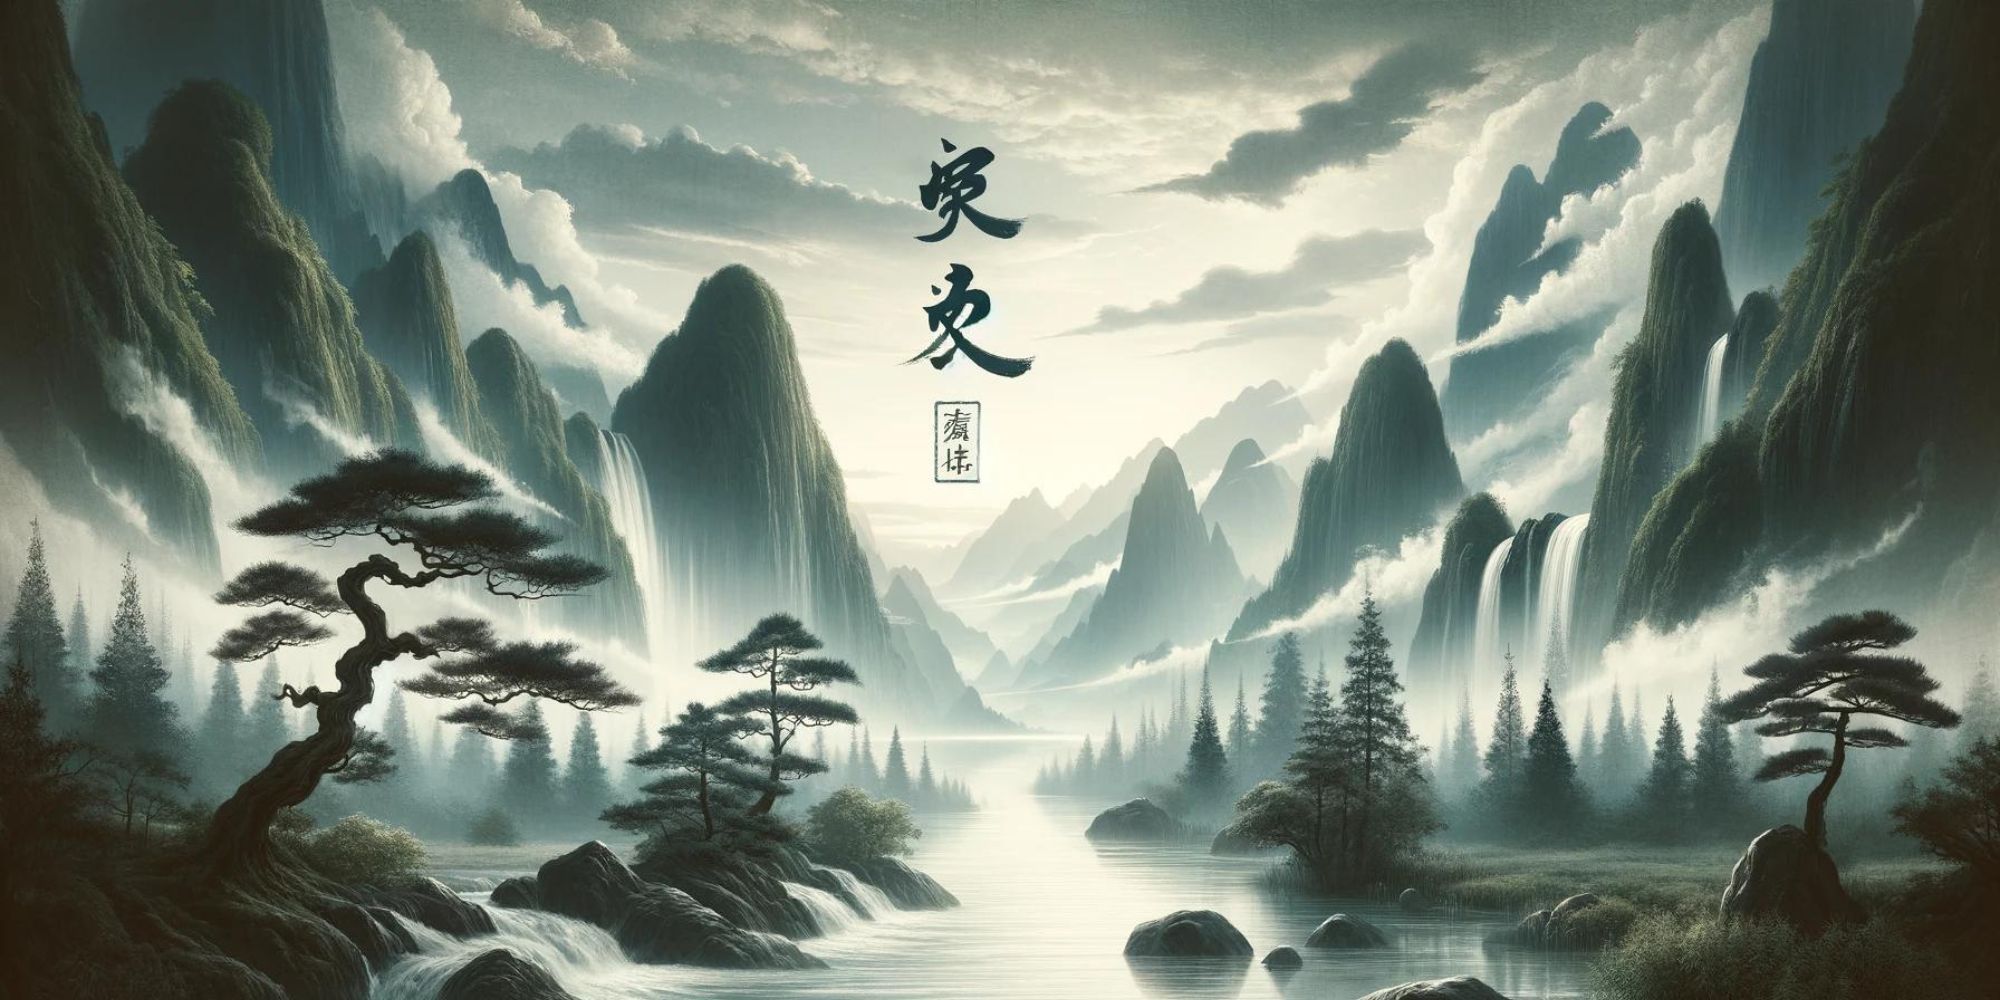 Taoism, an ancient philosophy and religion originating from China.